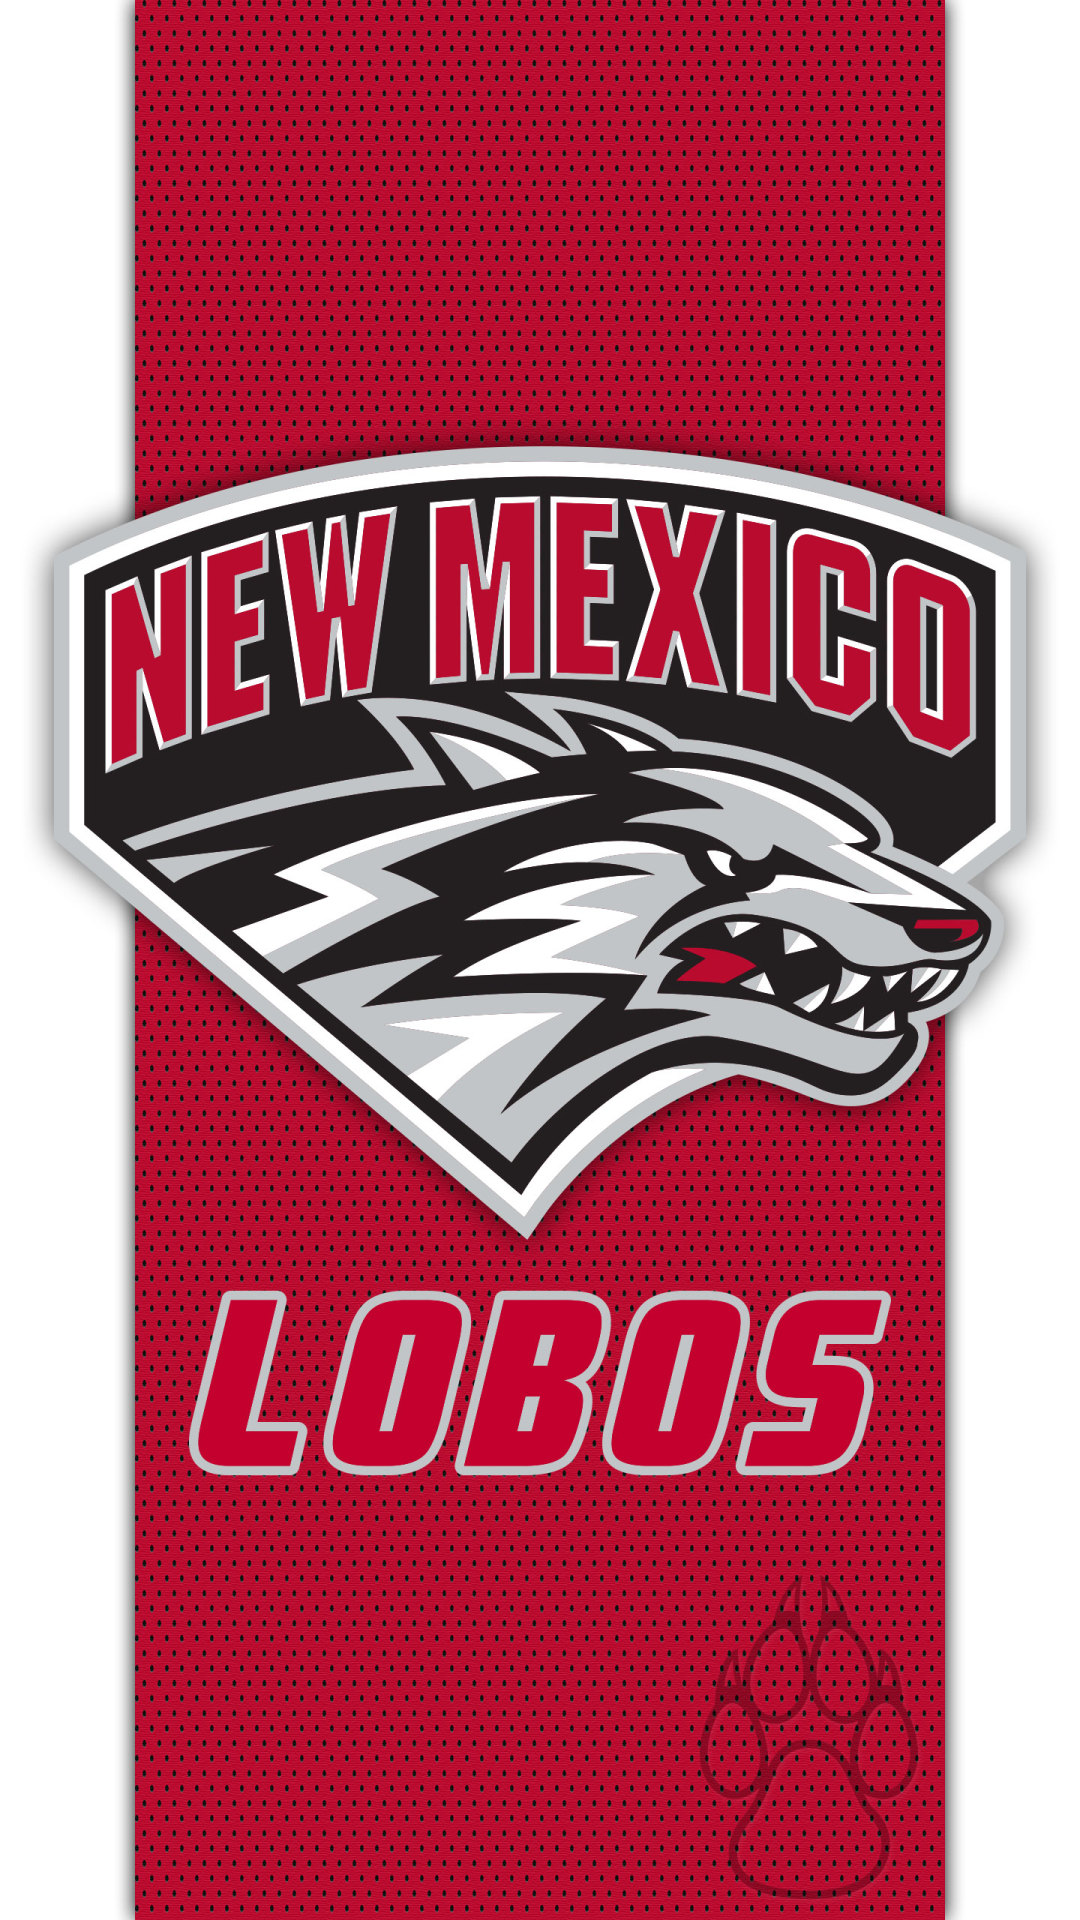 Sports Team Of New Mexico - HD Wallpaper 